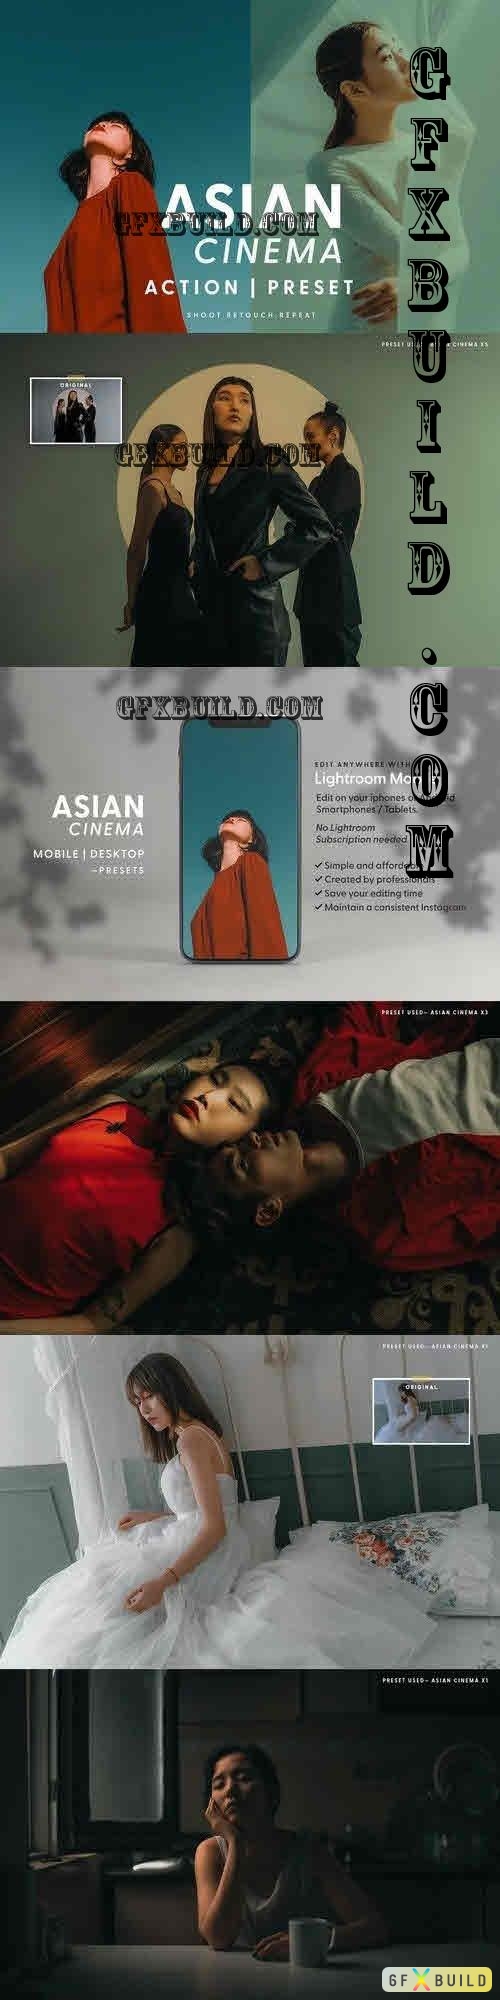 Asian Cinema - Actions & Presets